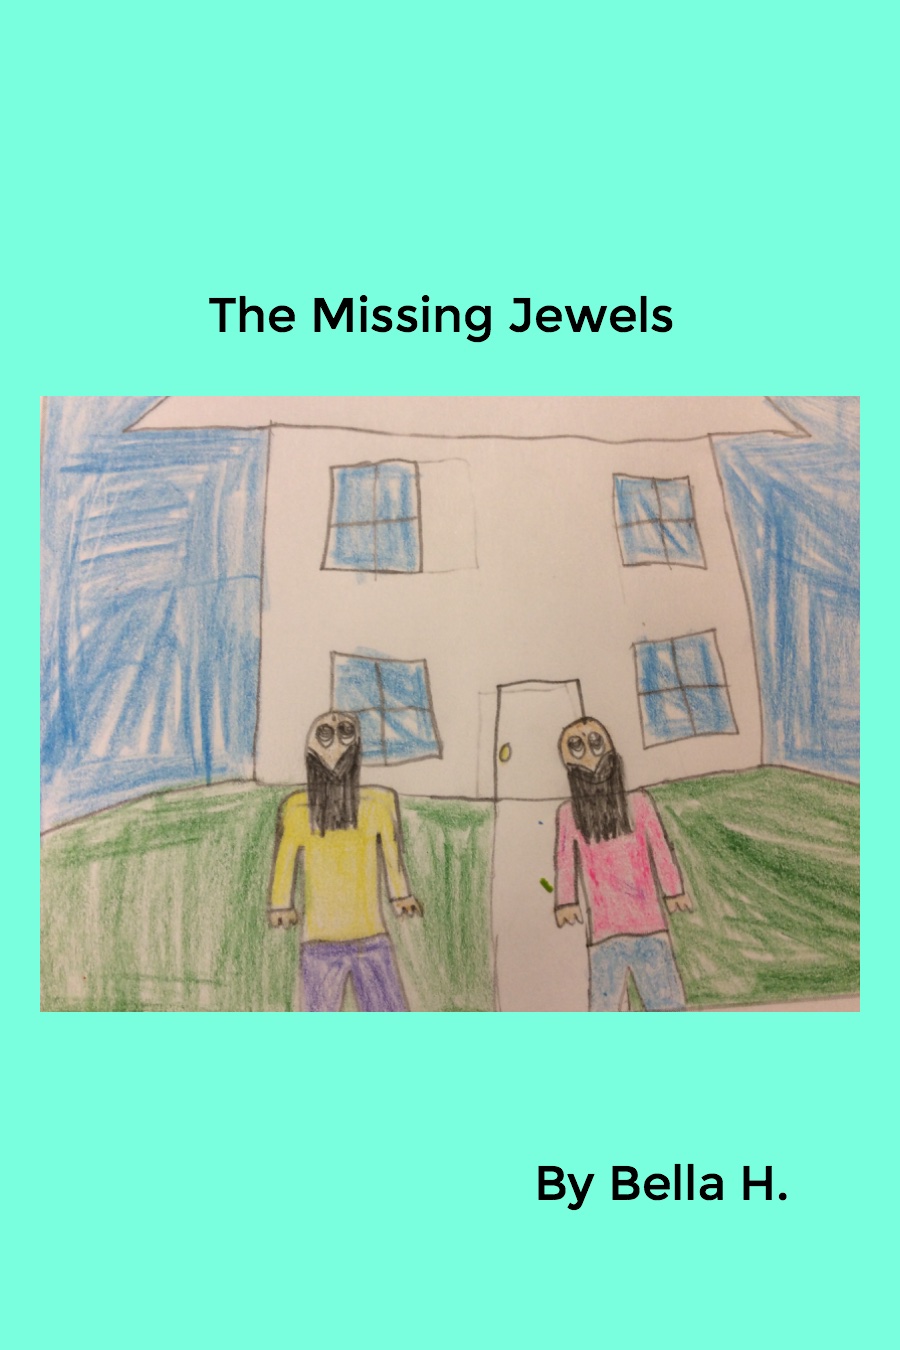 The Missing Jewels